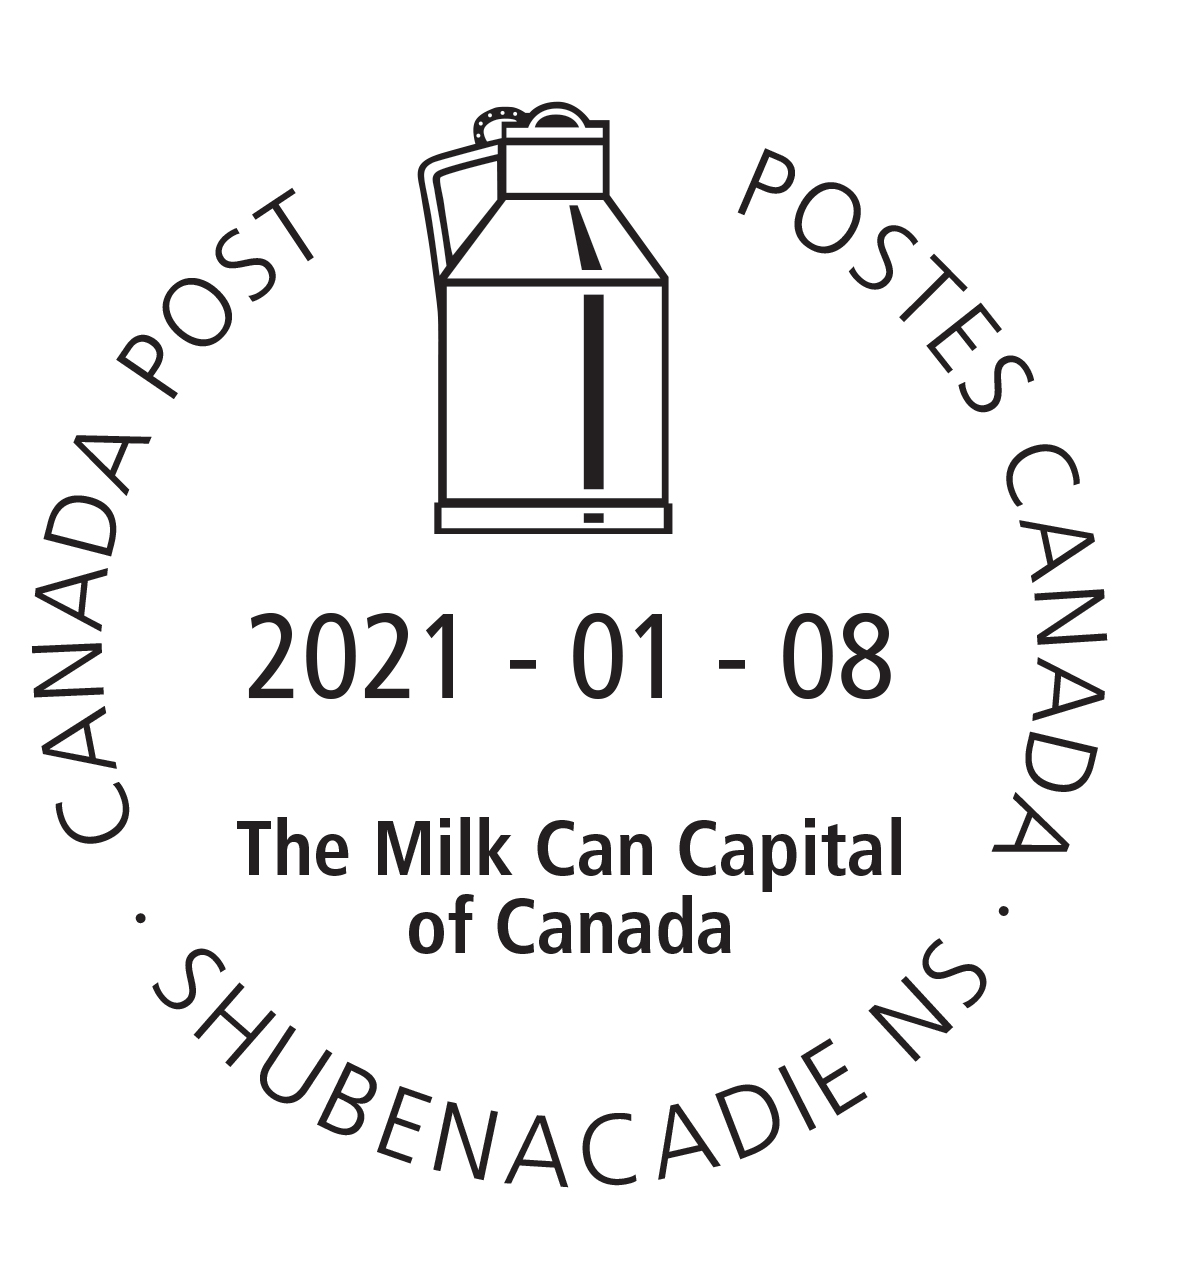 Metal milk can, local motto The Milk Can Capital of Canada, January 8, 2021.